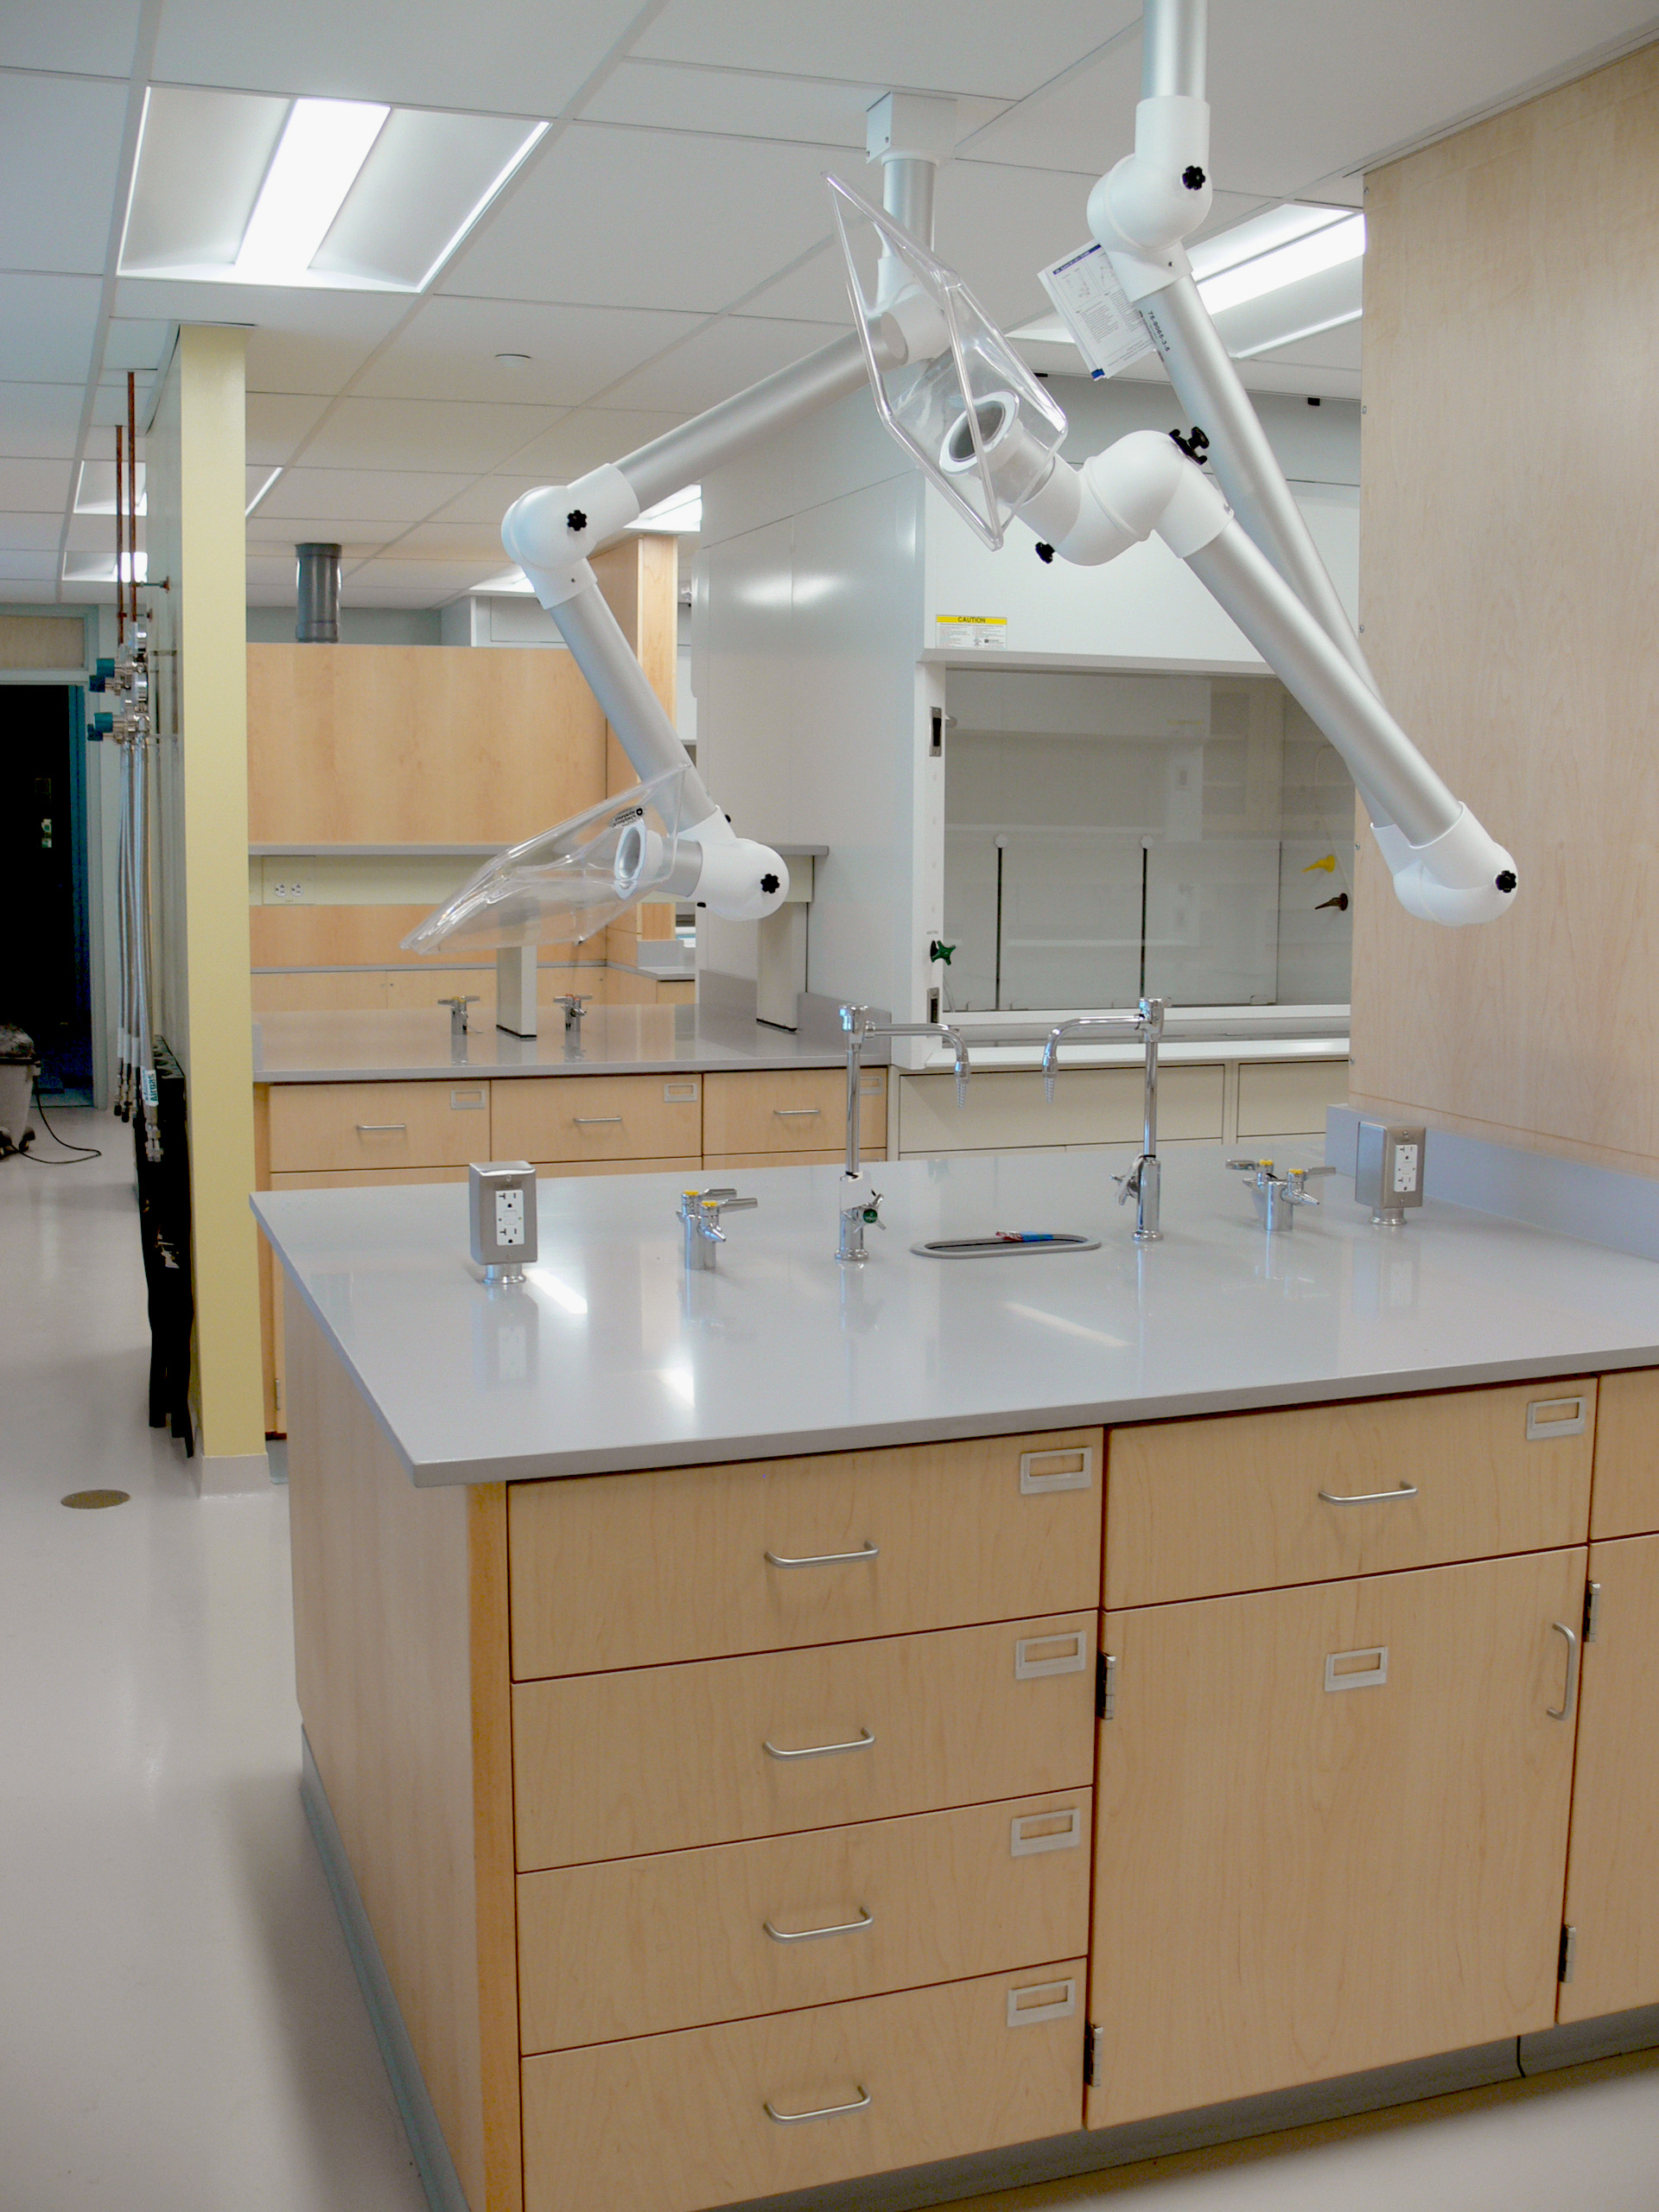 Interior, Olney Research Laboratory at UMass Lowell, workstations, fume hood, ceiling mounted lab fume hood exhaust